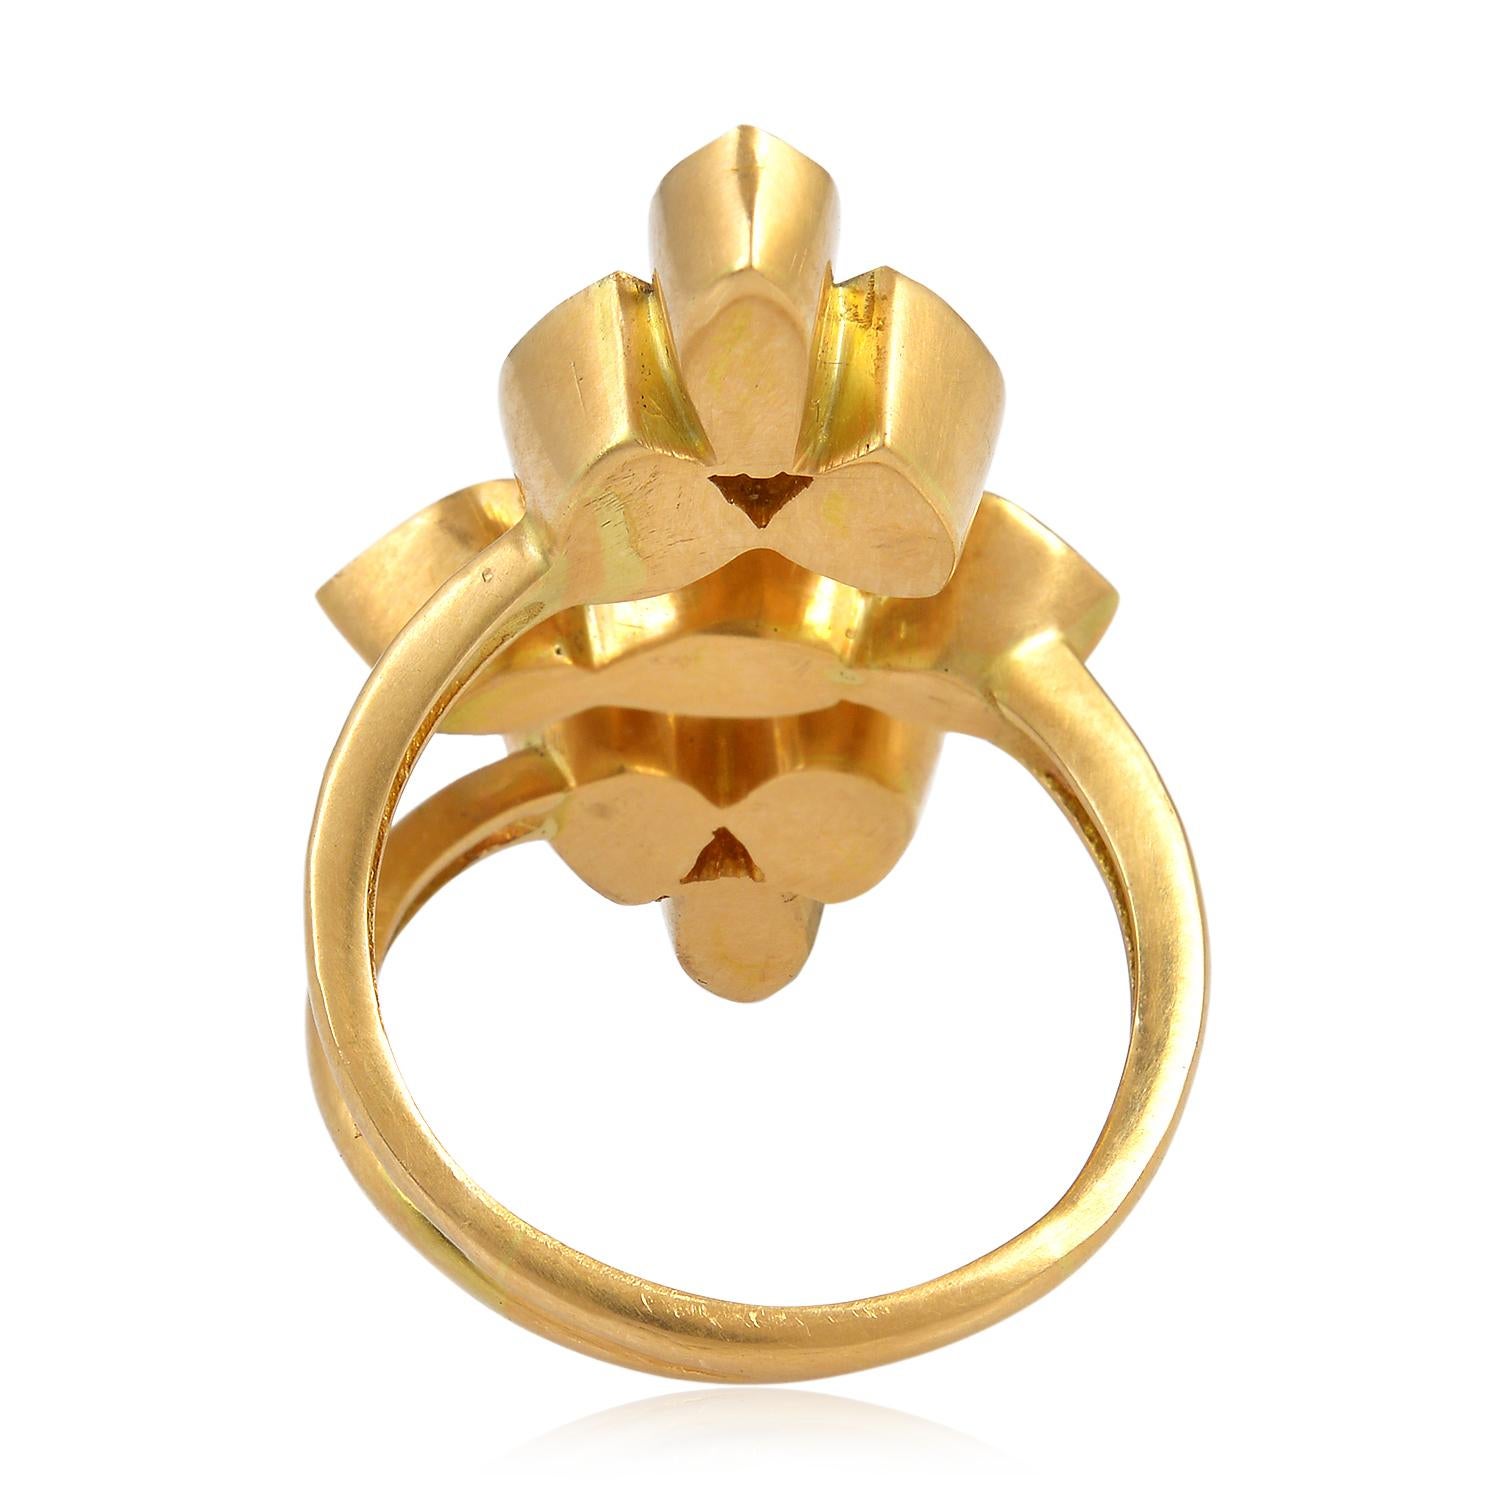 This ring has been meticulously crafted from 18-karat yellow gold & sterling silver. It is set in 2.33 carats of rose cut diamonds. 

The ring is a size 7 and may be resized to larger or smaller upon request. 
FOLLOW  MEGHNA JEWELS storefront to